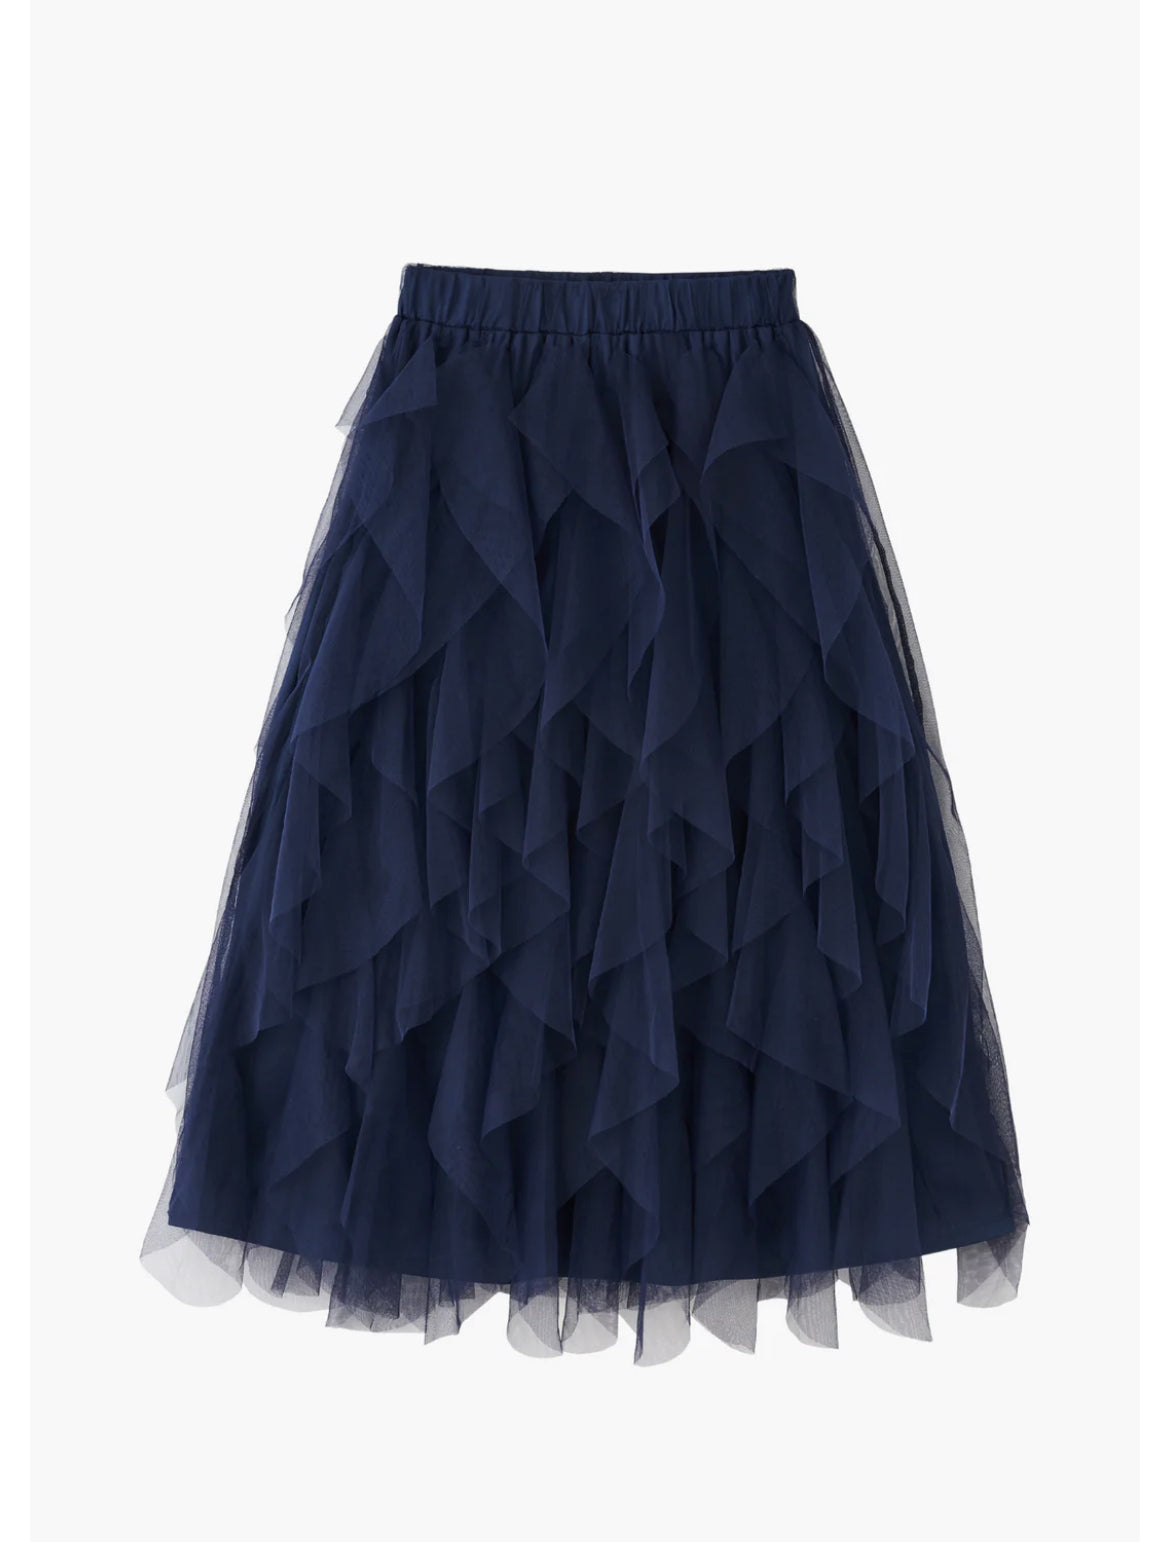 Amelie Layered Ruffle Frill Tulle Skirt - Navy Blue